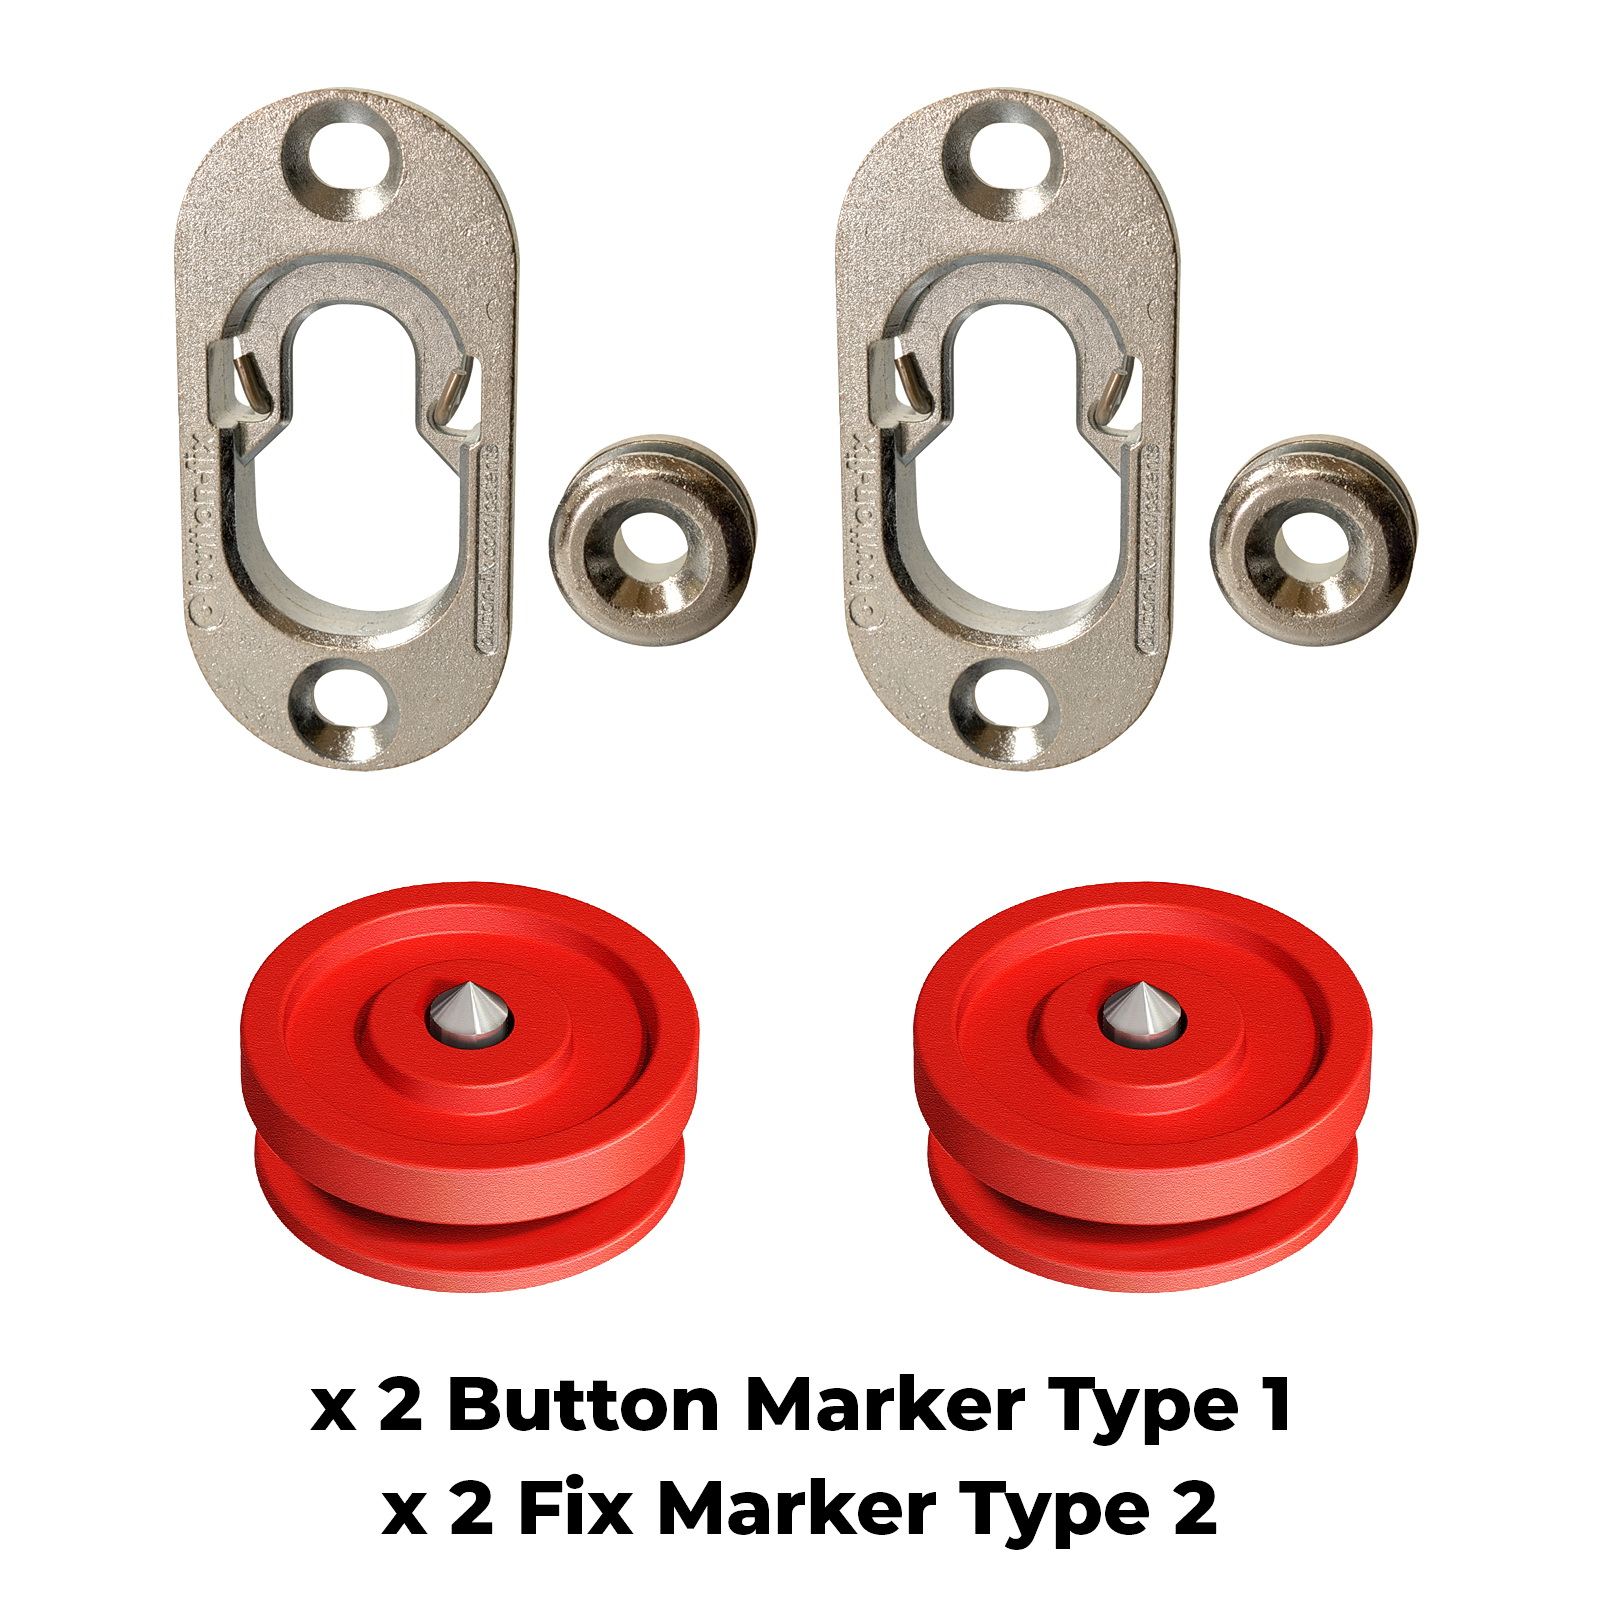 Button Fix Type 1 Metal Fix Bracket Fixing with Stainless Steel Retaining Spring for Fire Retardant Panels, Marine Interiors, Vibration & Shock Tested + Marker Tools x2 + 2 Marker Tool's